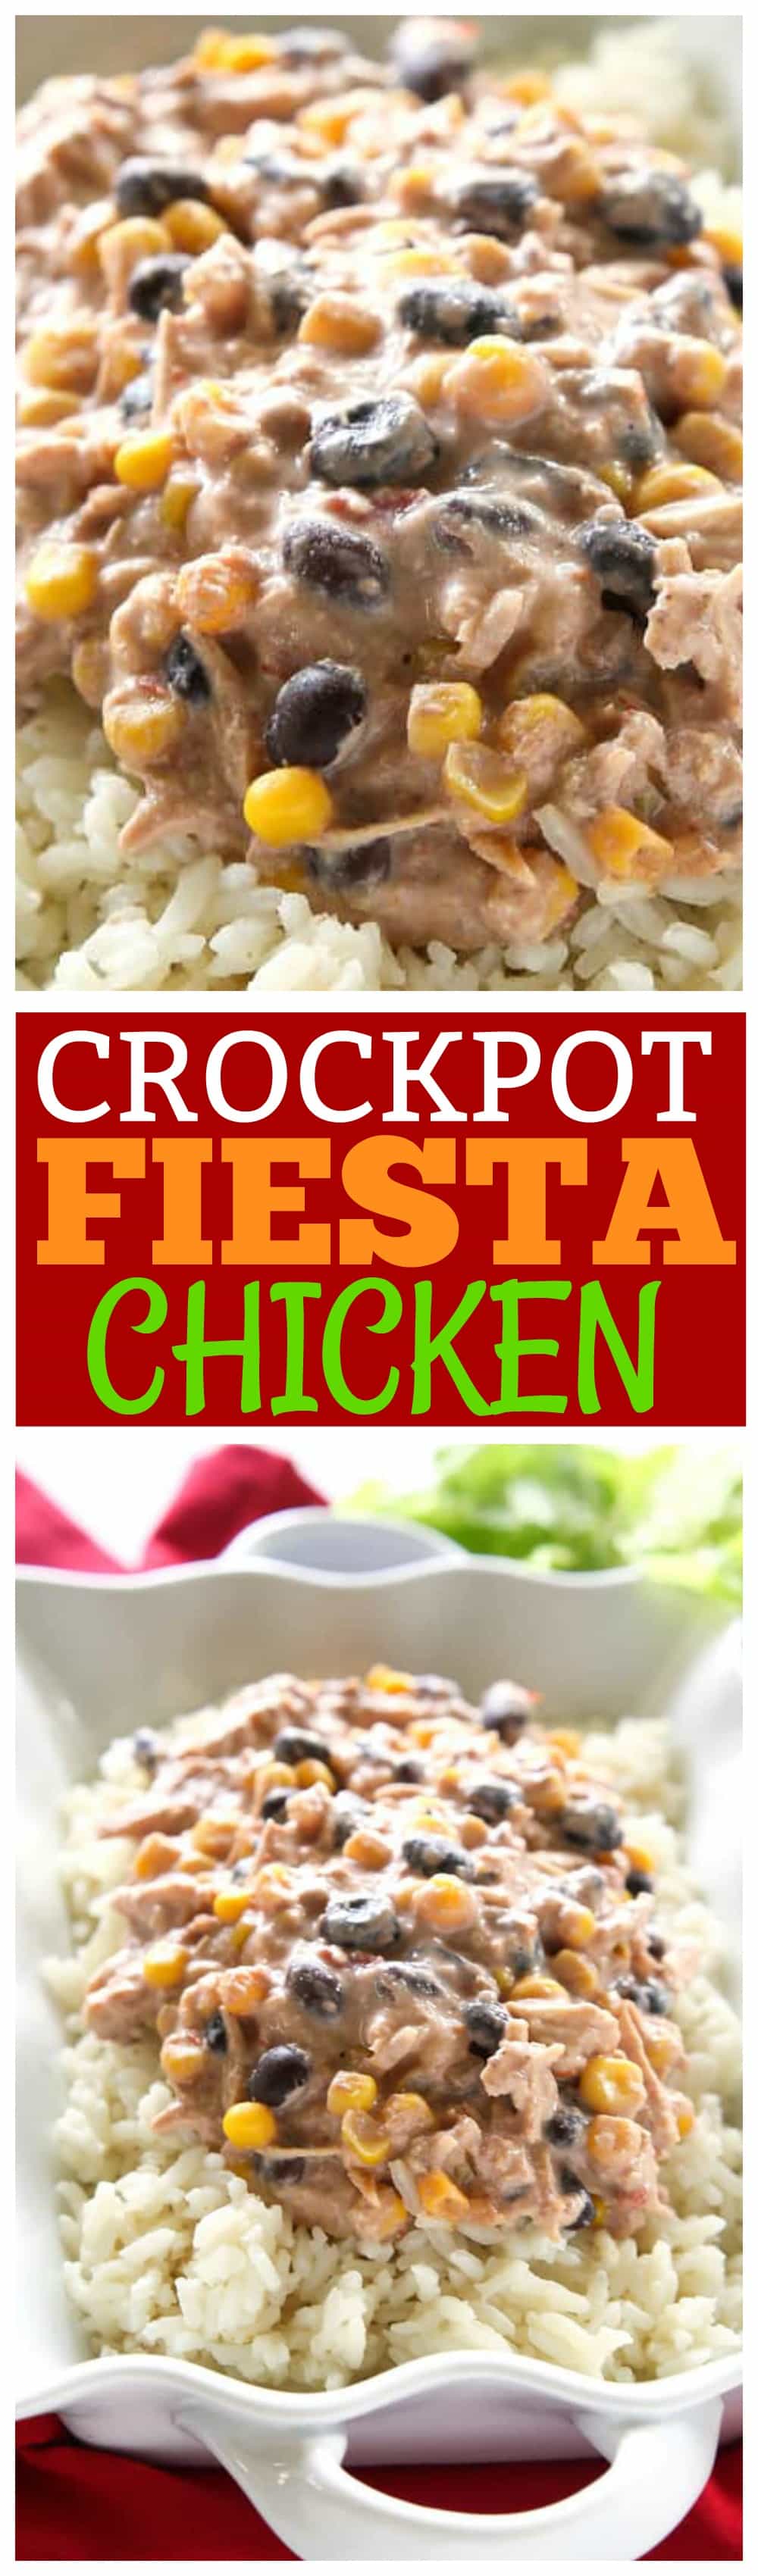 This easy Crockpot Fiesta Chicken is an easy is an easy delicious meal with only 5 ingredients! Great for tacos, burritos, salads, or over rice. #fiesta #chicken #crockpot #slowcooker #mexican #easy #dinner